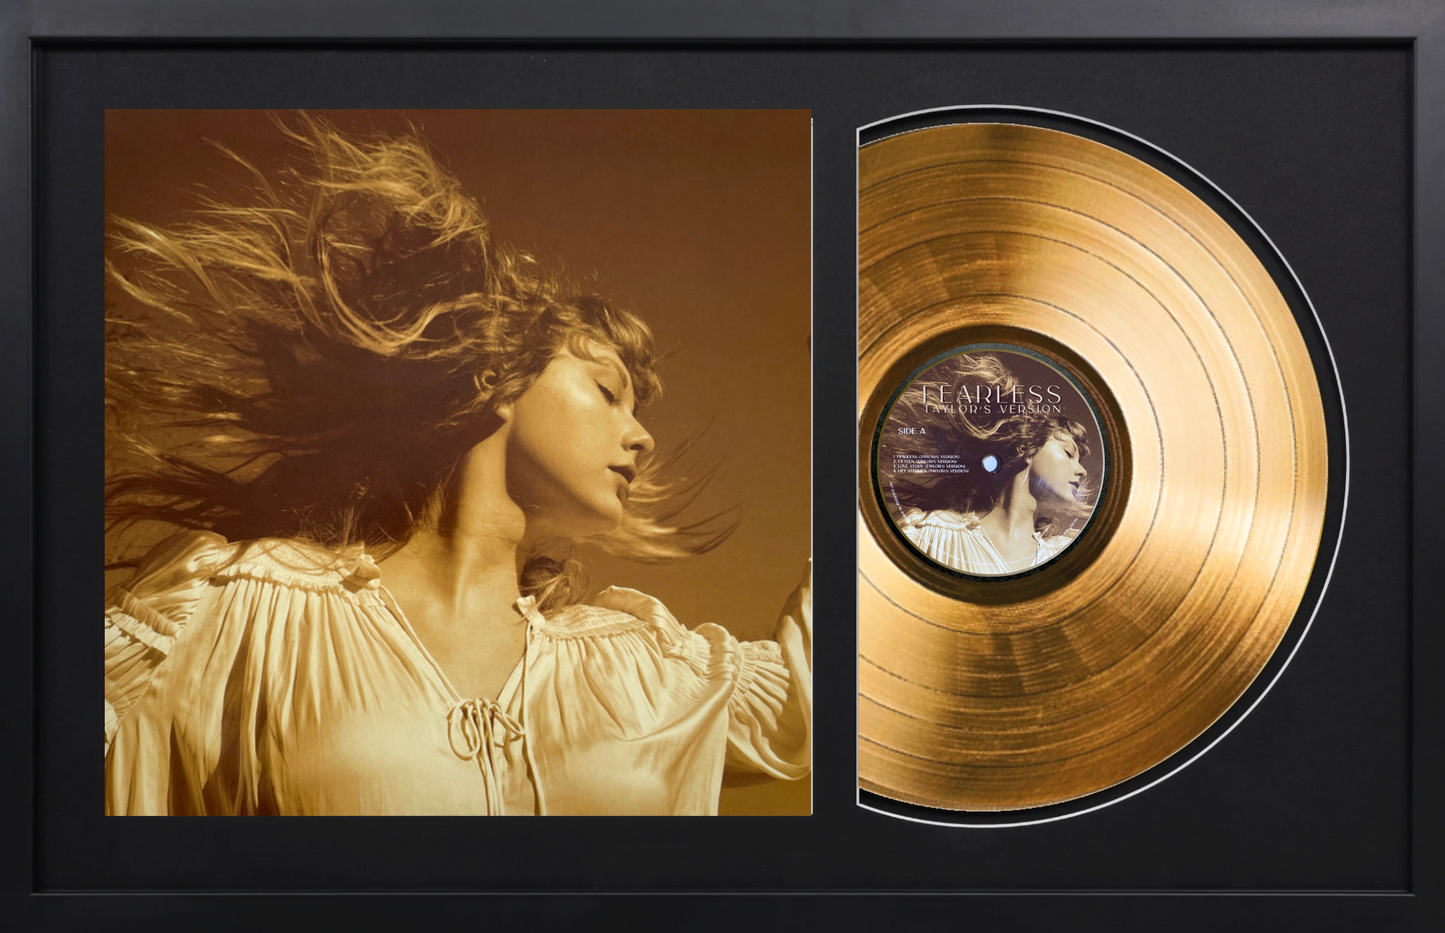 Taylor Swift - Fearless (Taylor's Version) - 14K Gold Record - Limited Edition Album